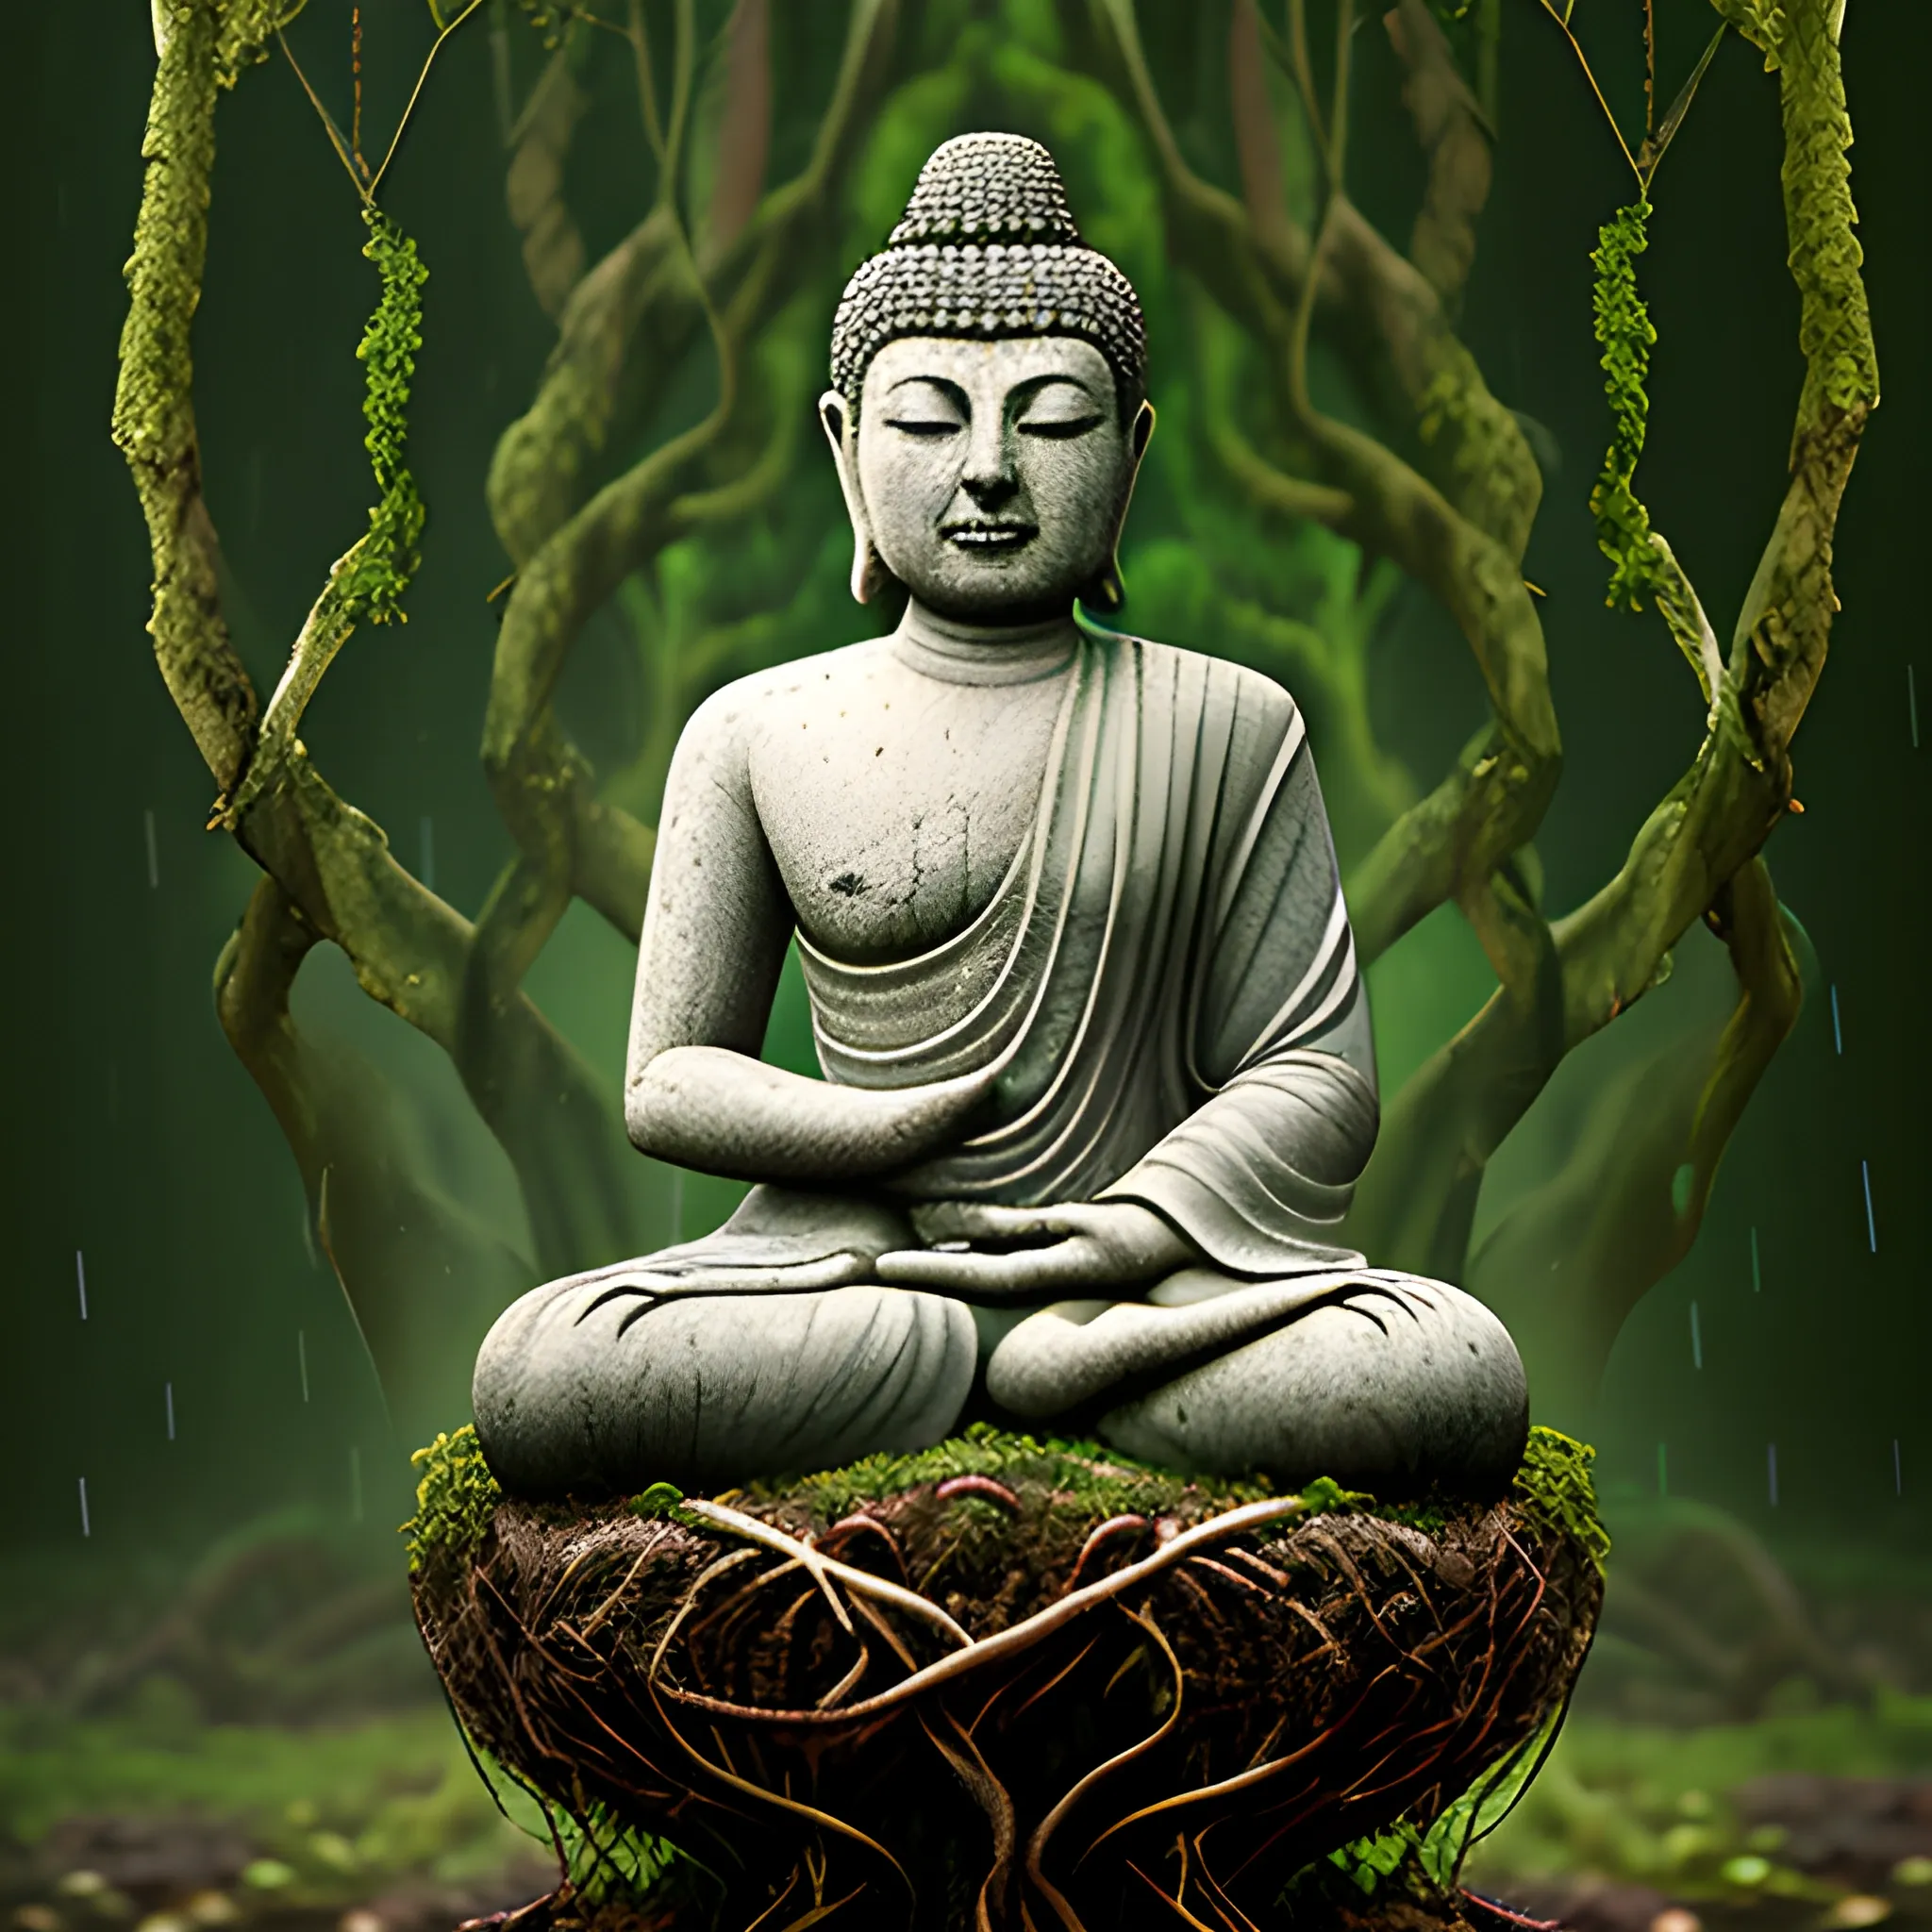 stone buddha entwited in vines and roots, raining
, Oil Painting, 3D